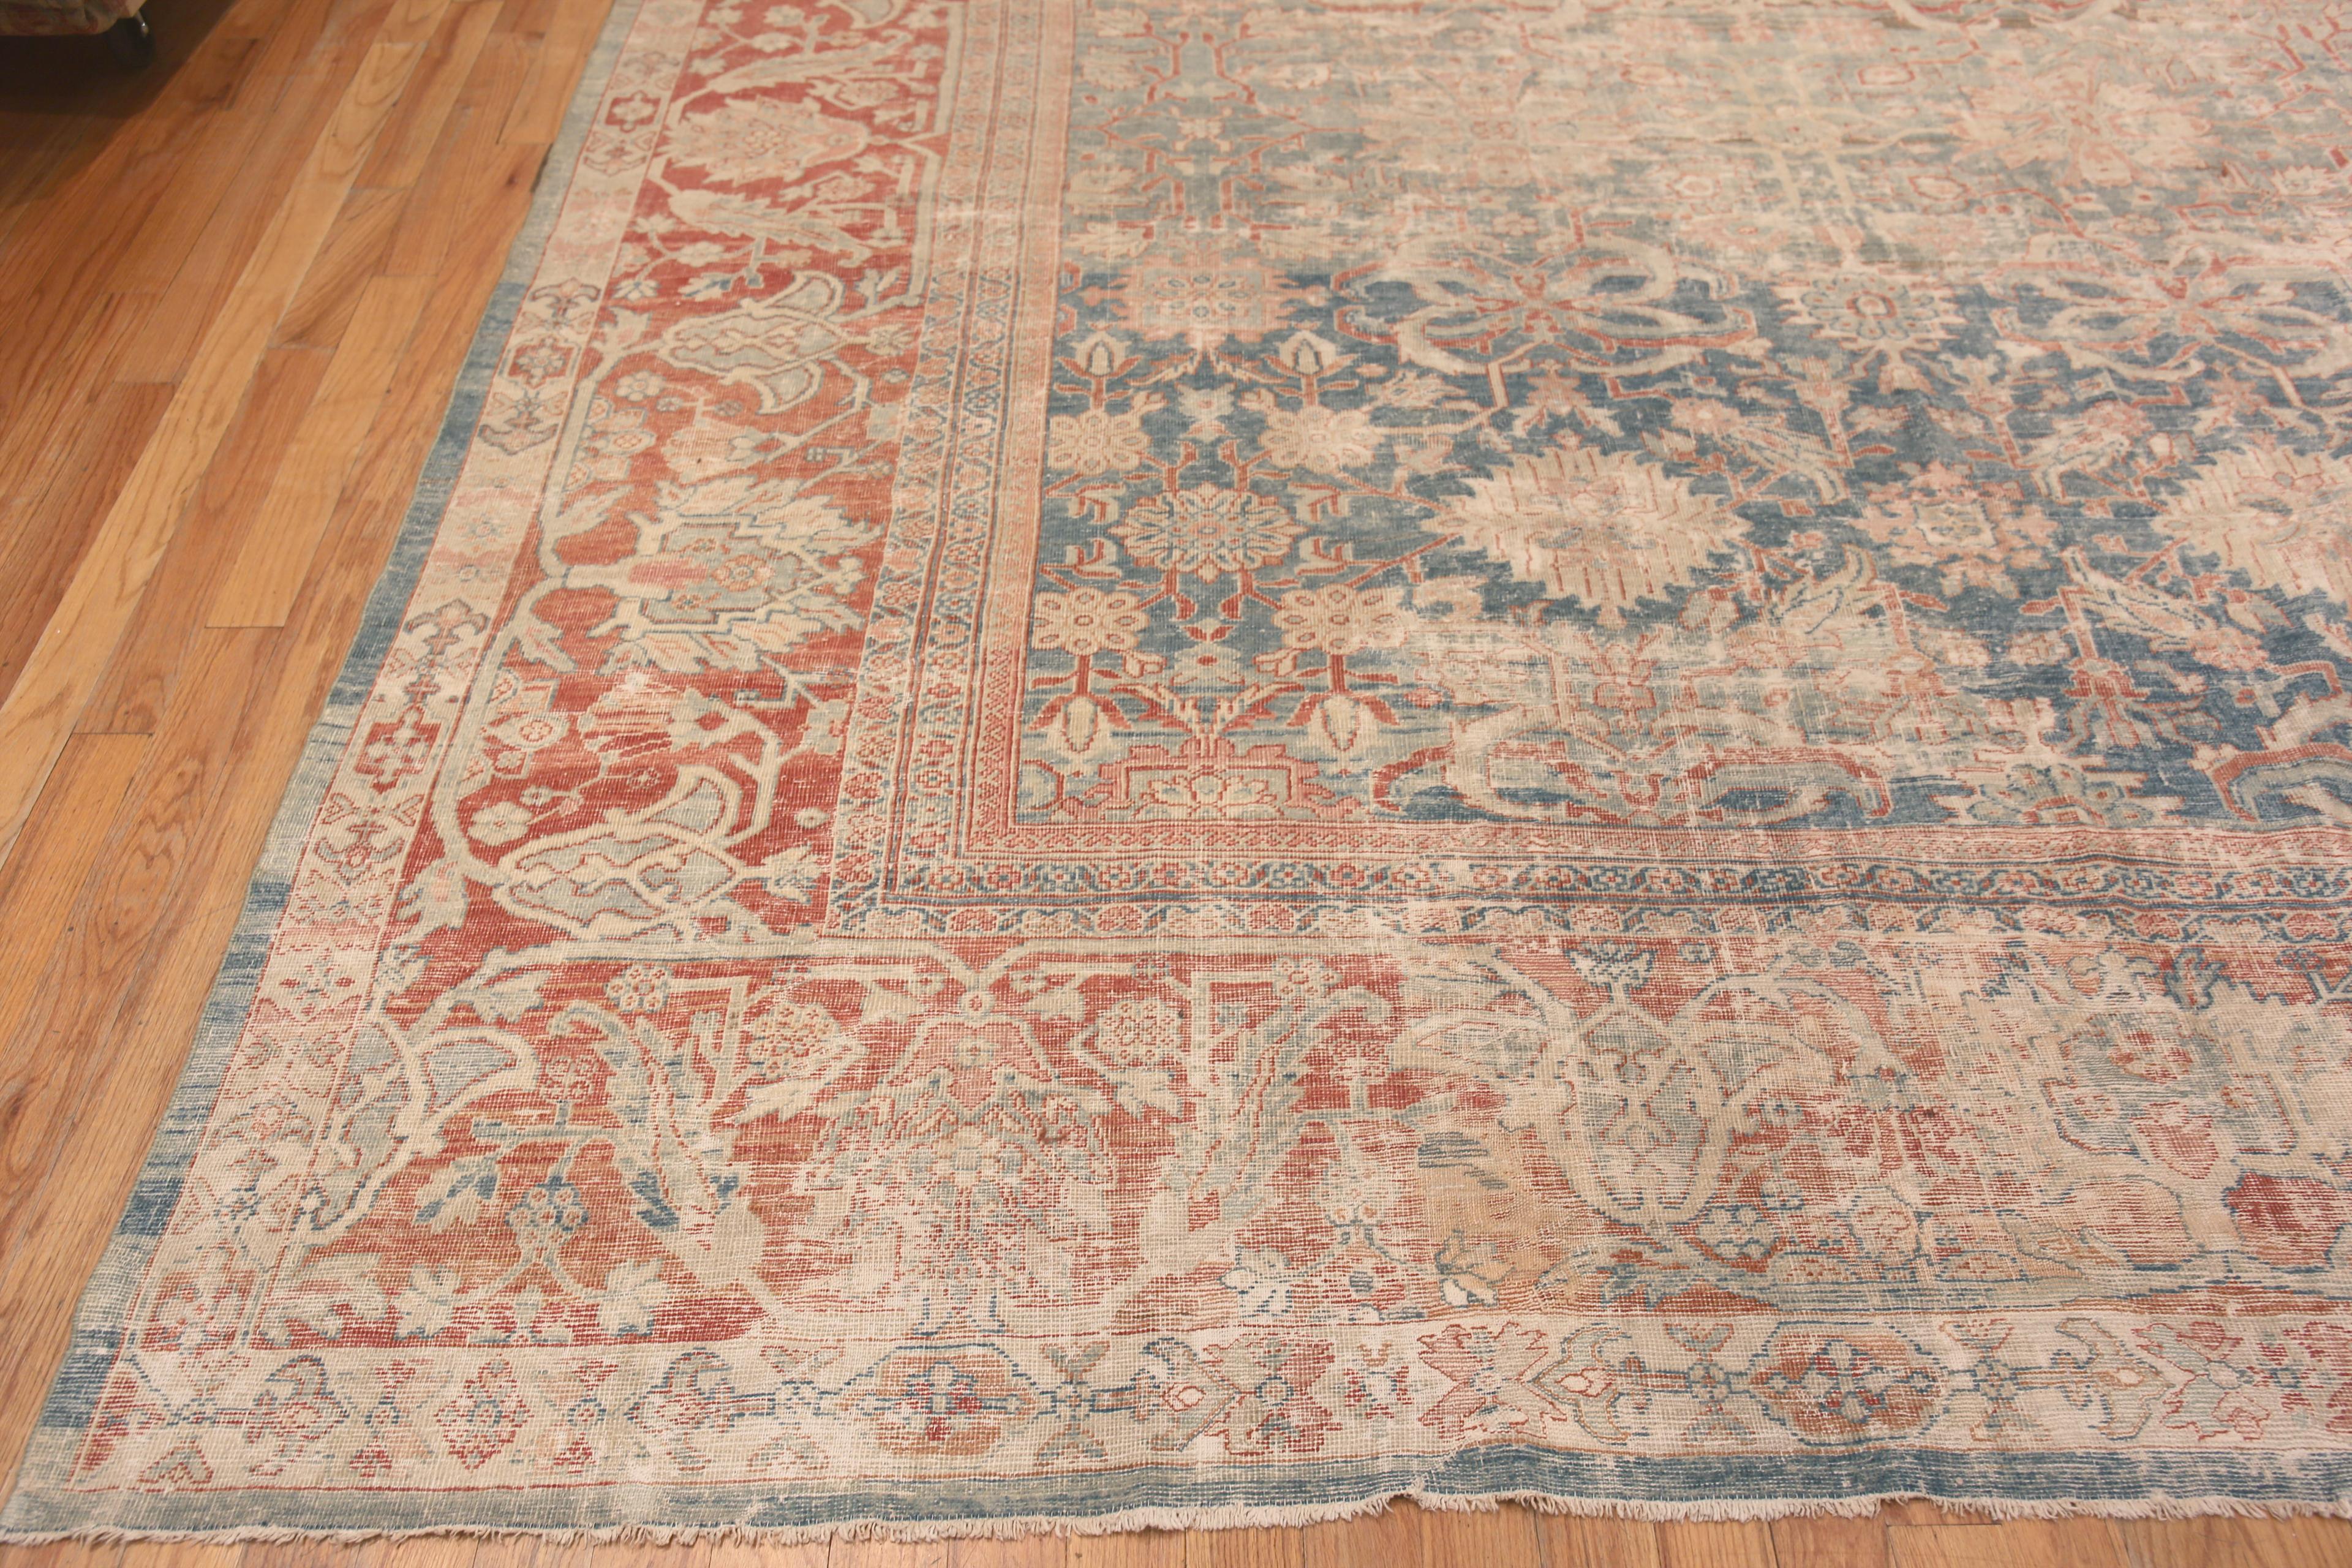 Large Decorative Antique Persian Shabby Chic Sultanabad Rug 11' x 17' In Distressed Condition For Sale In New York, NY